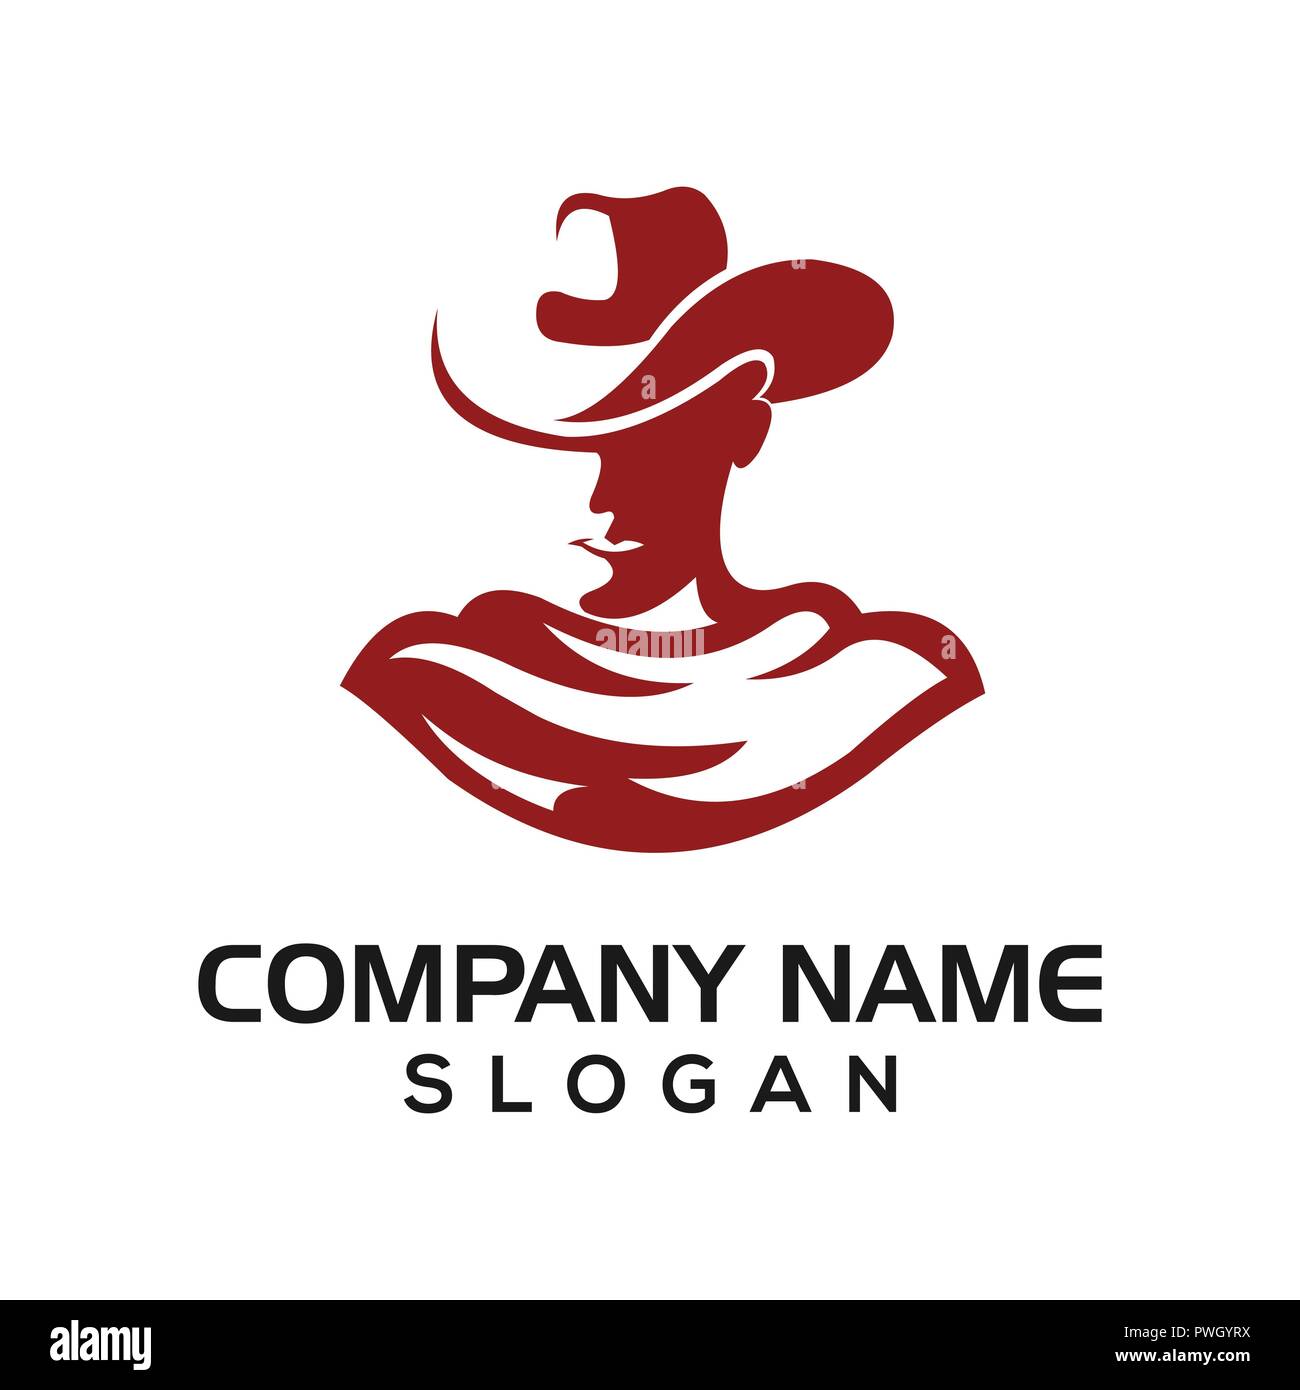 silhouette cowboy design becomes a template for sports logos, farms, food drinks, etc. Stock Photo